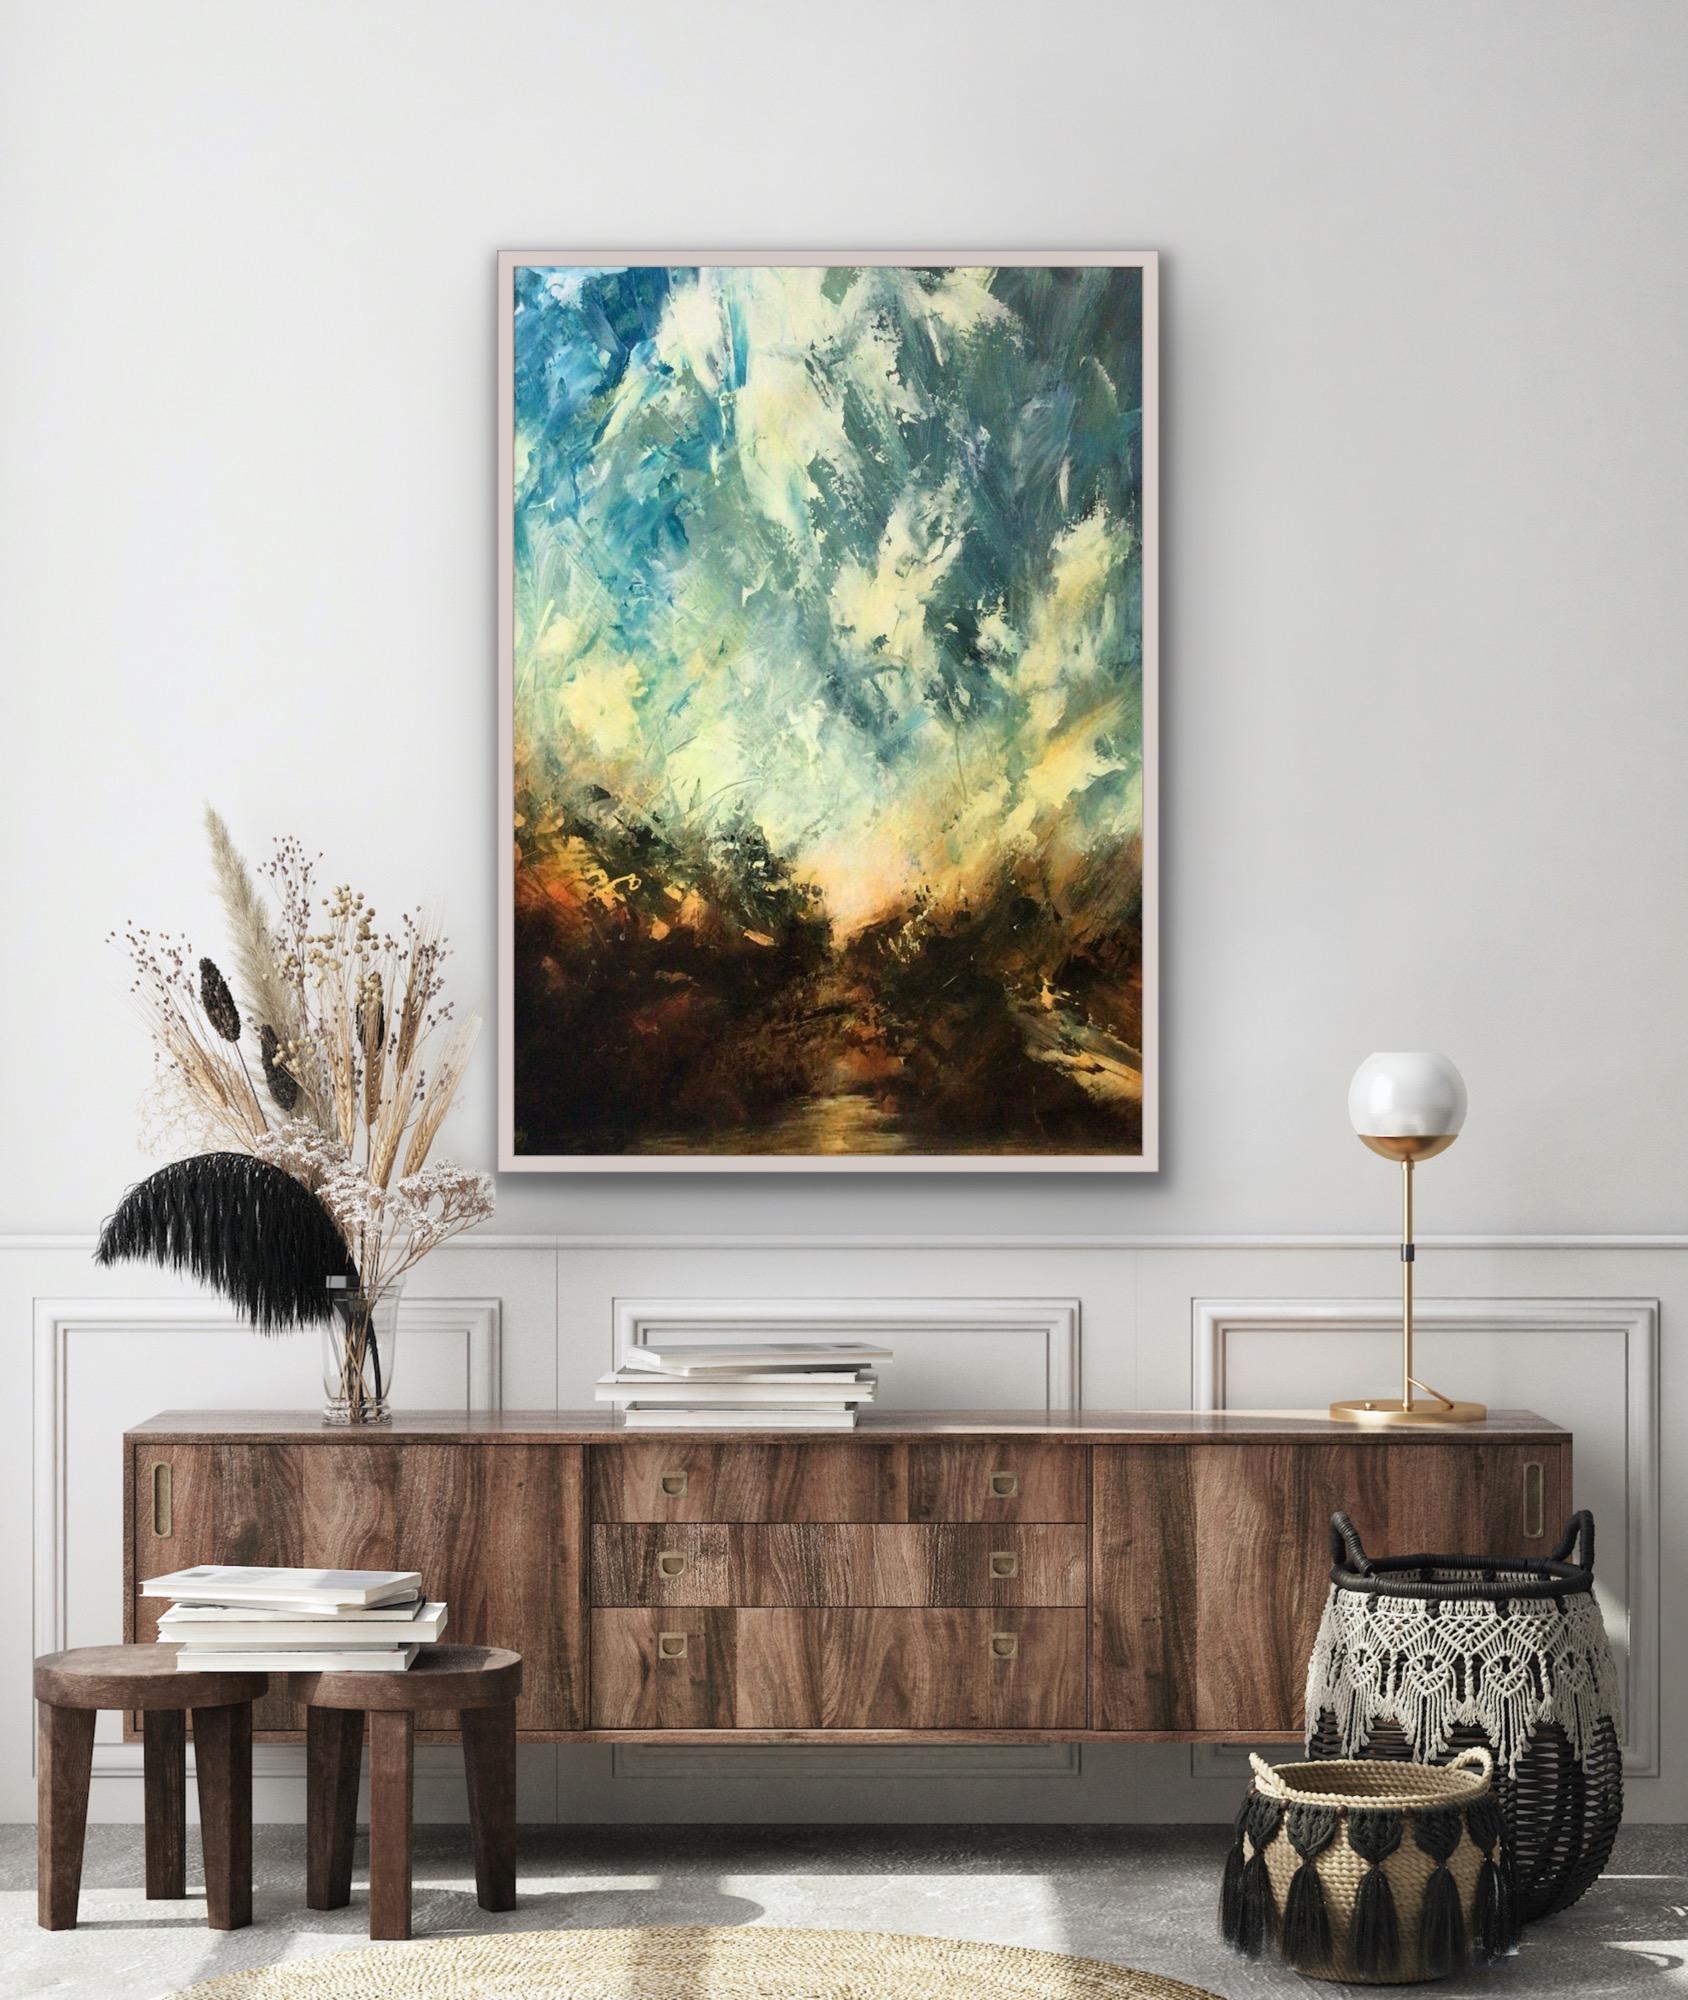 Sky, River, Abstract Contemporary Landscape Painting, Seascape Art, Skyscape Art - Black Abstract Painting by David Hayes